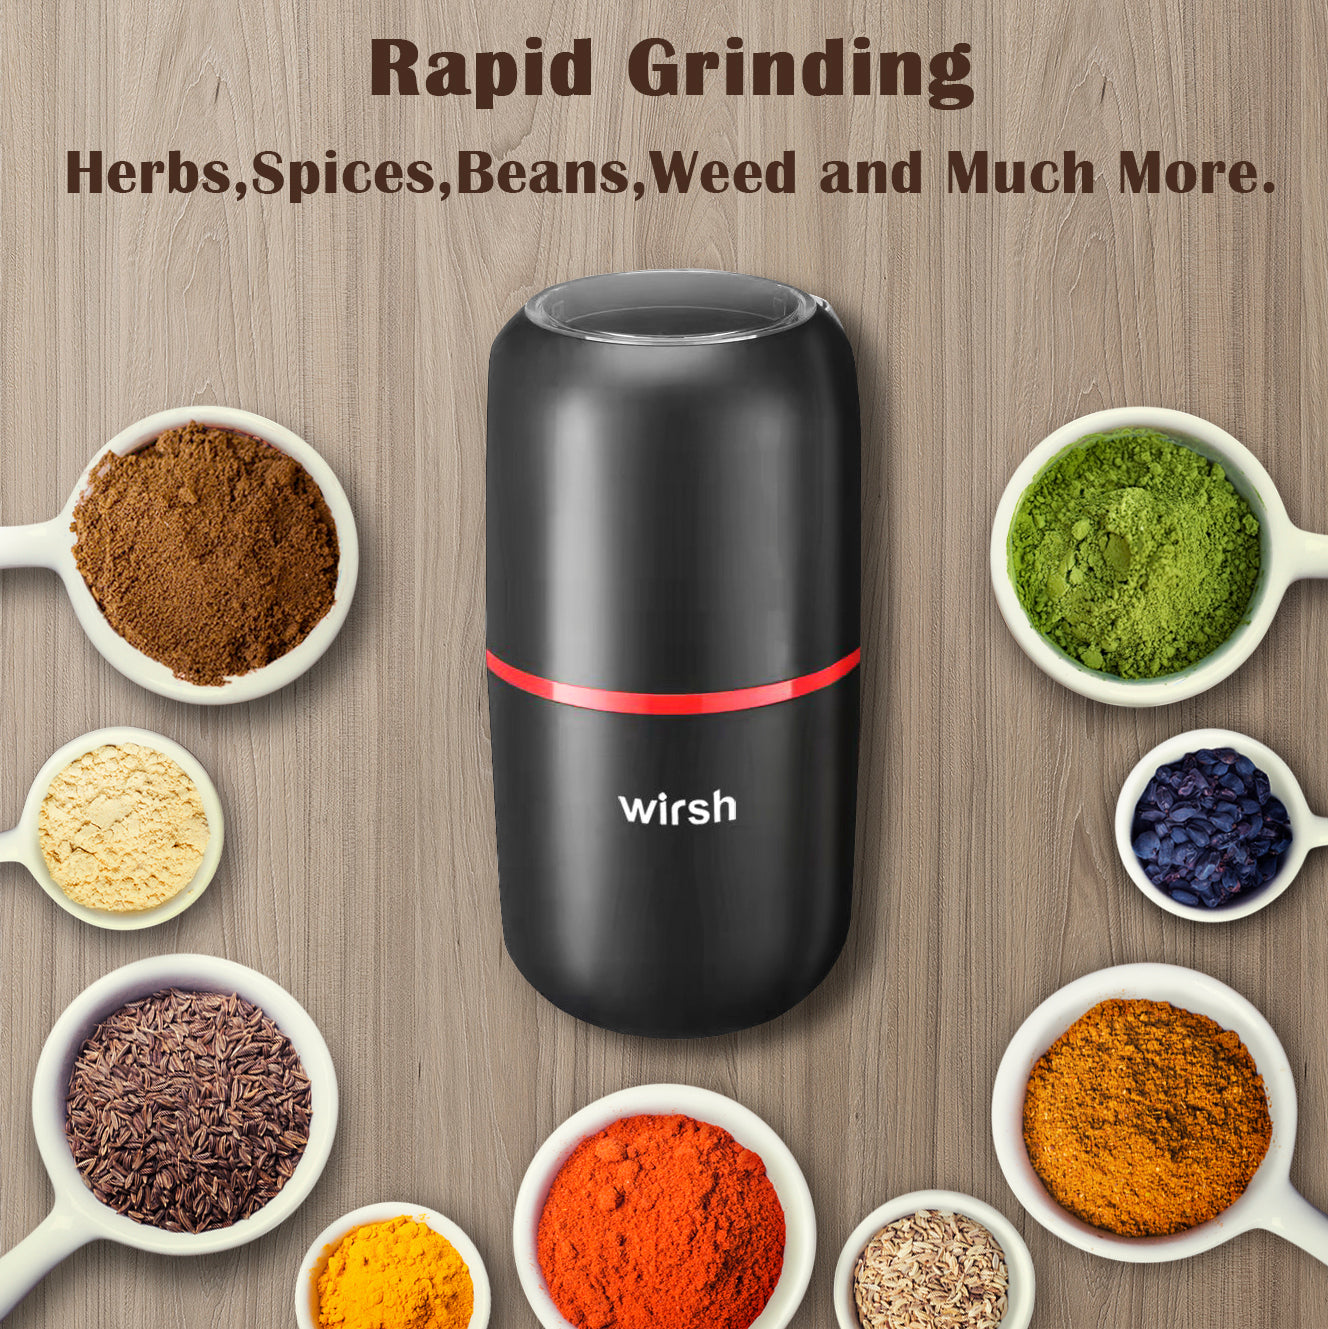 Wirsh Coffee Grinder-Electric Herb Spice Grinder with 5.3oz. Stainless  Steel Removable Bowl and 200W Motor for Herbs,Spices,Coffee